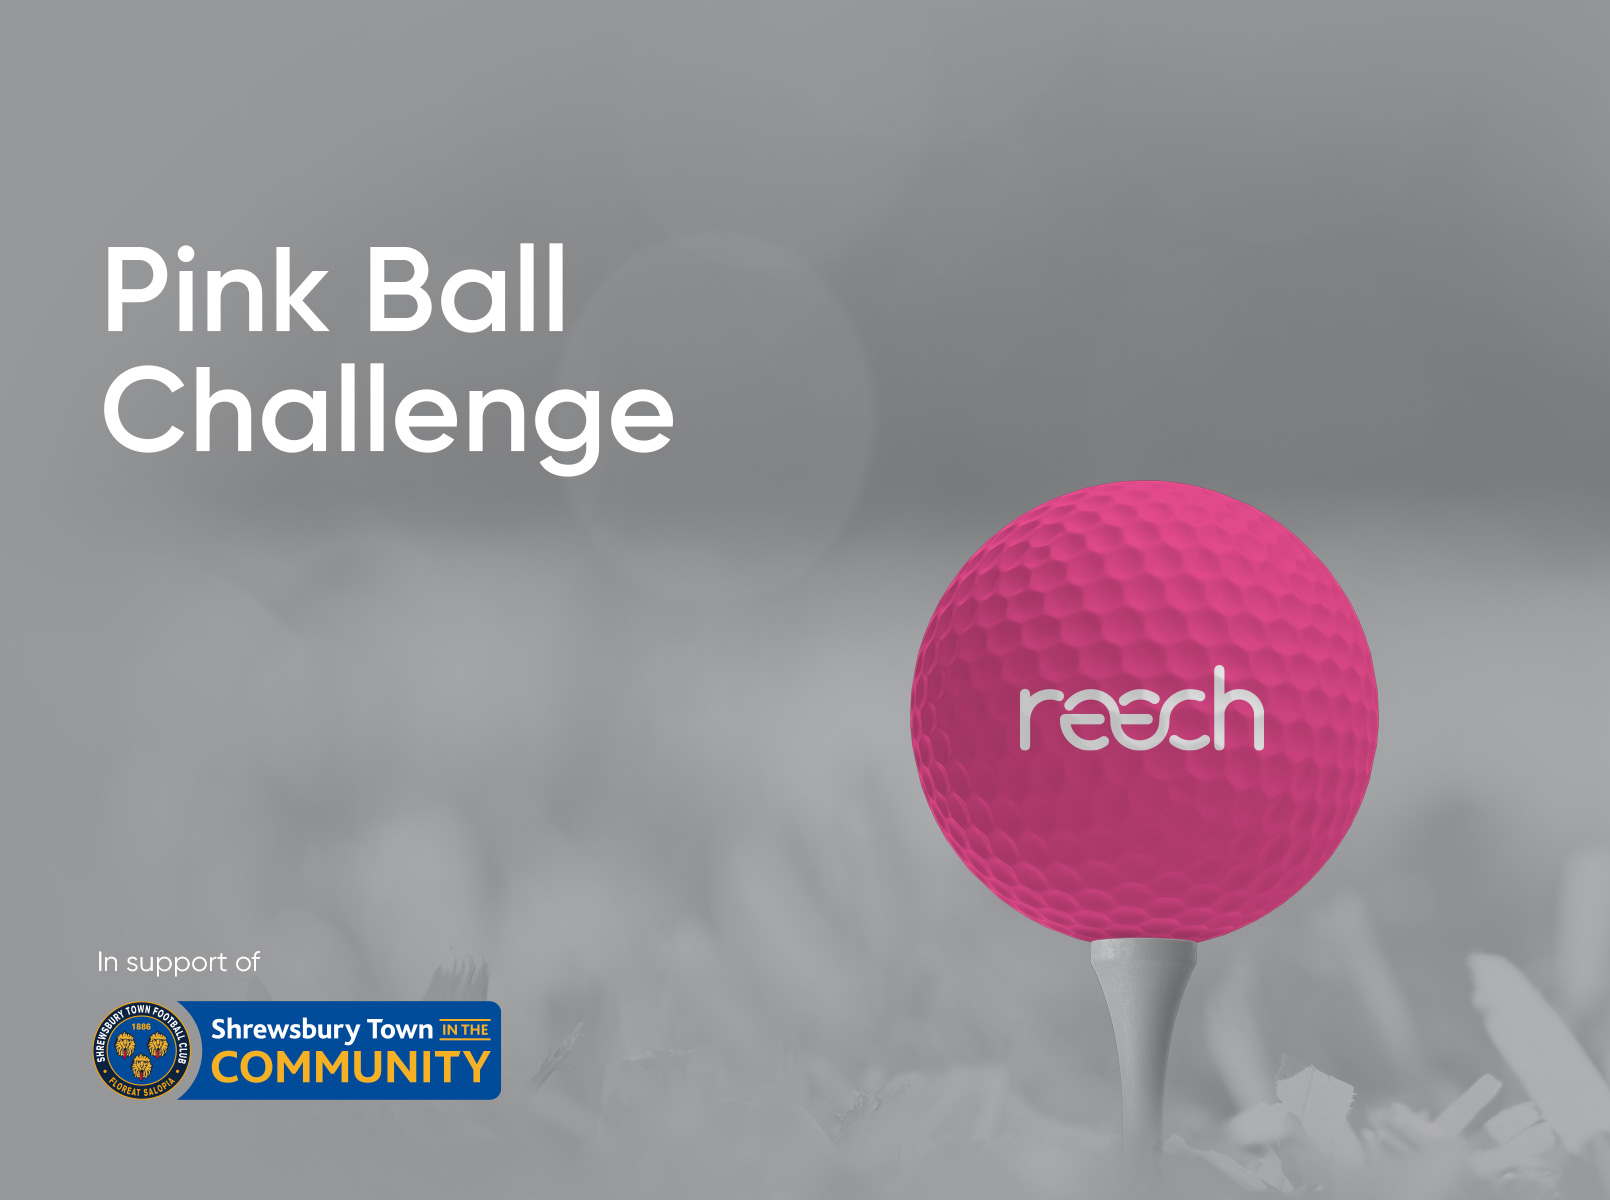 Fore! Reech launches Pink Ball Challenge for local cause